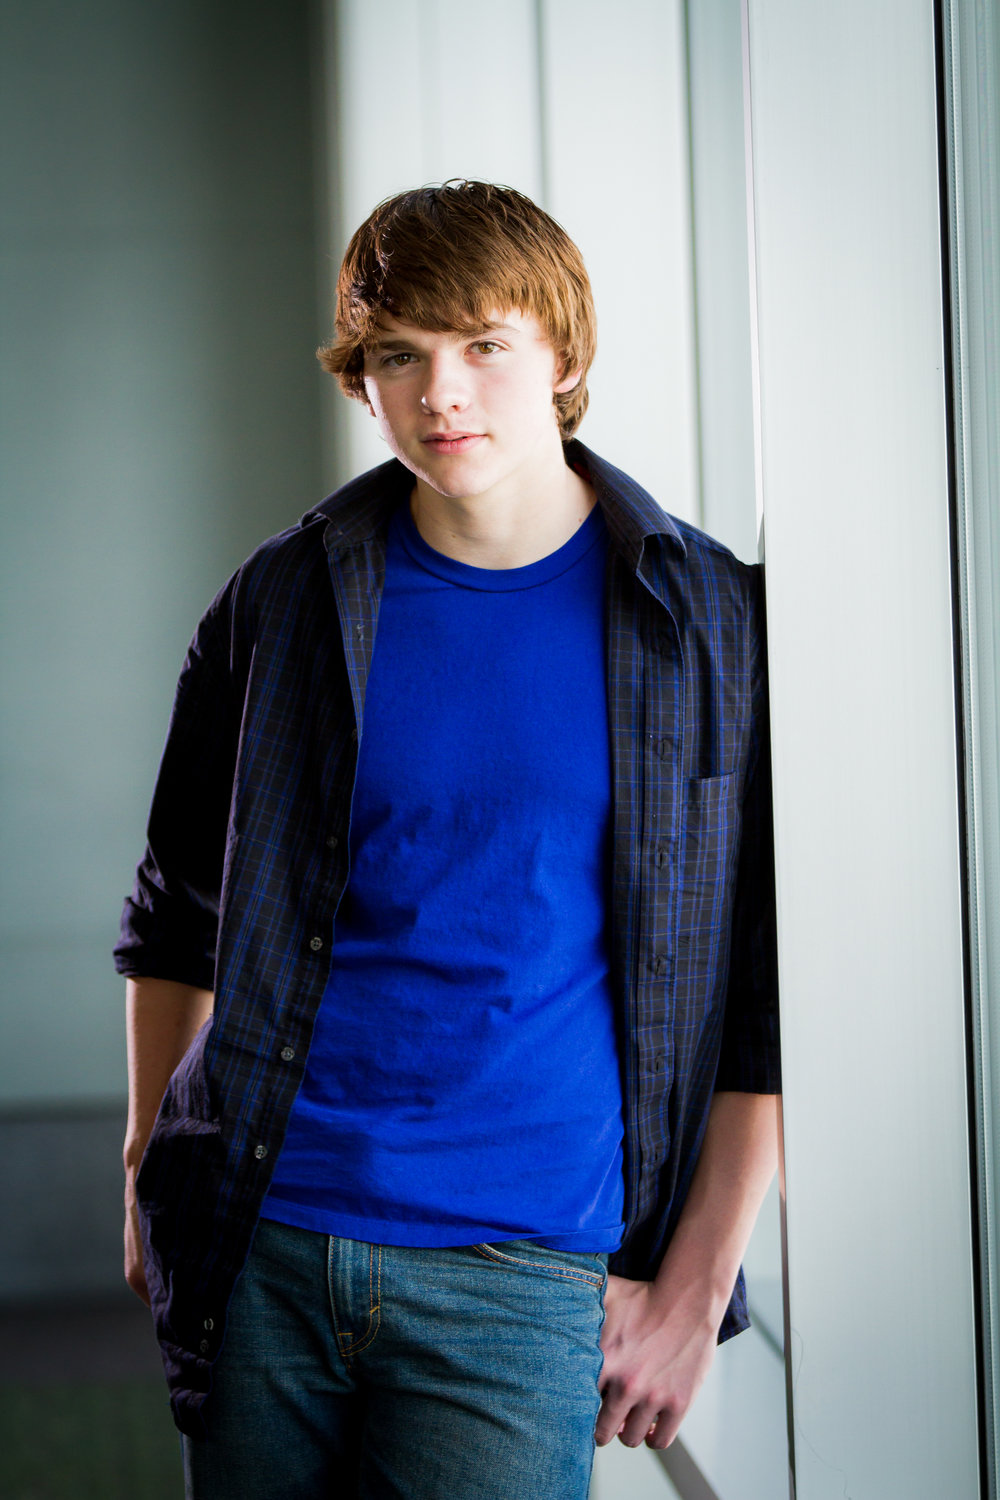 Some New Pictures - Joel Courtney